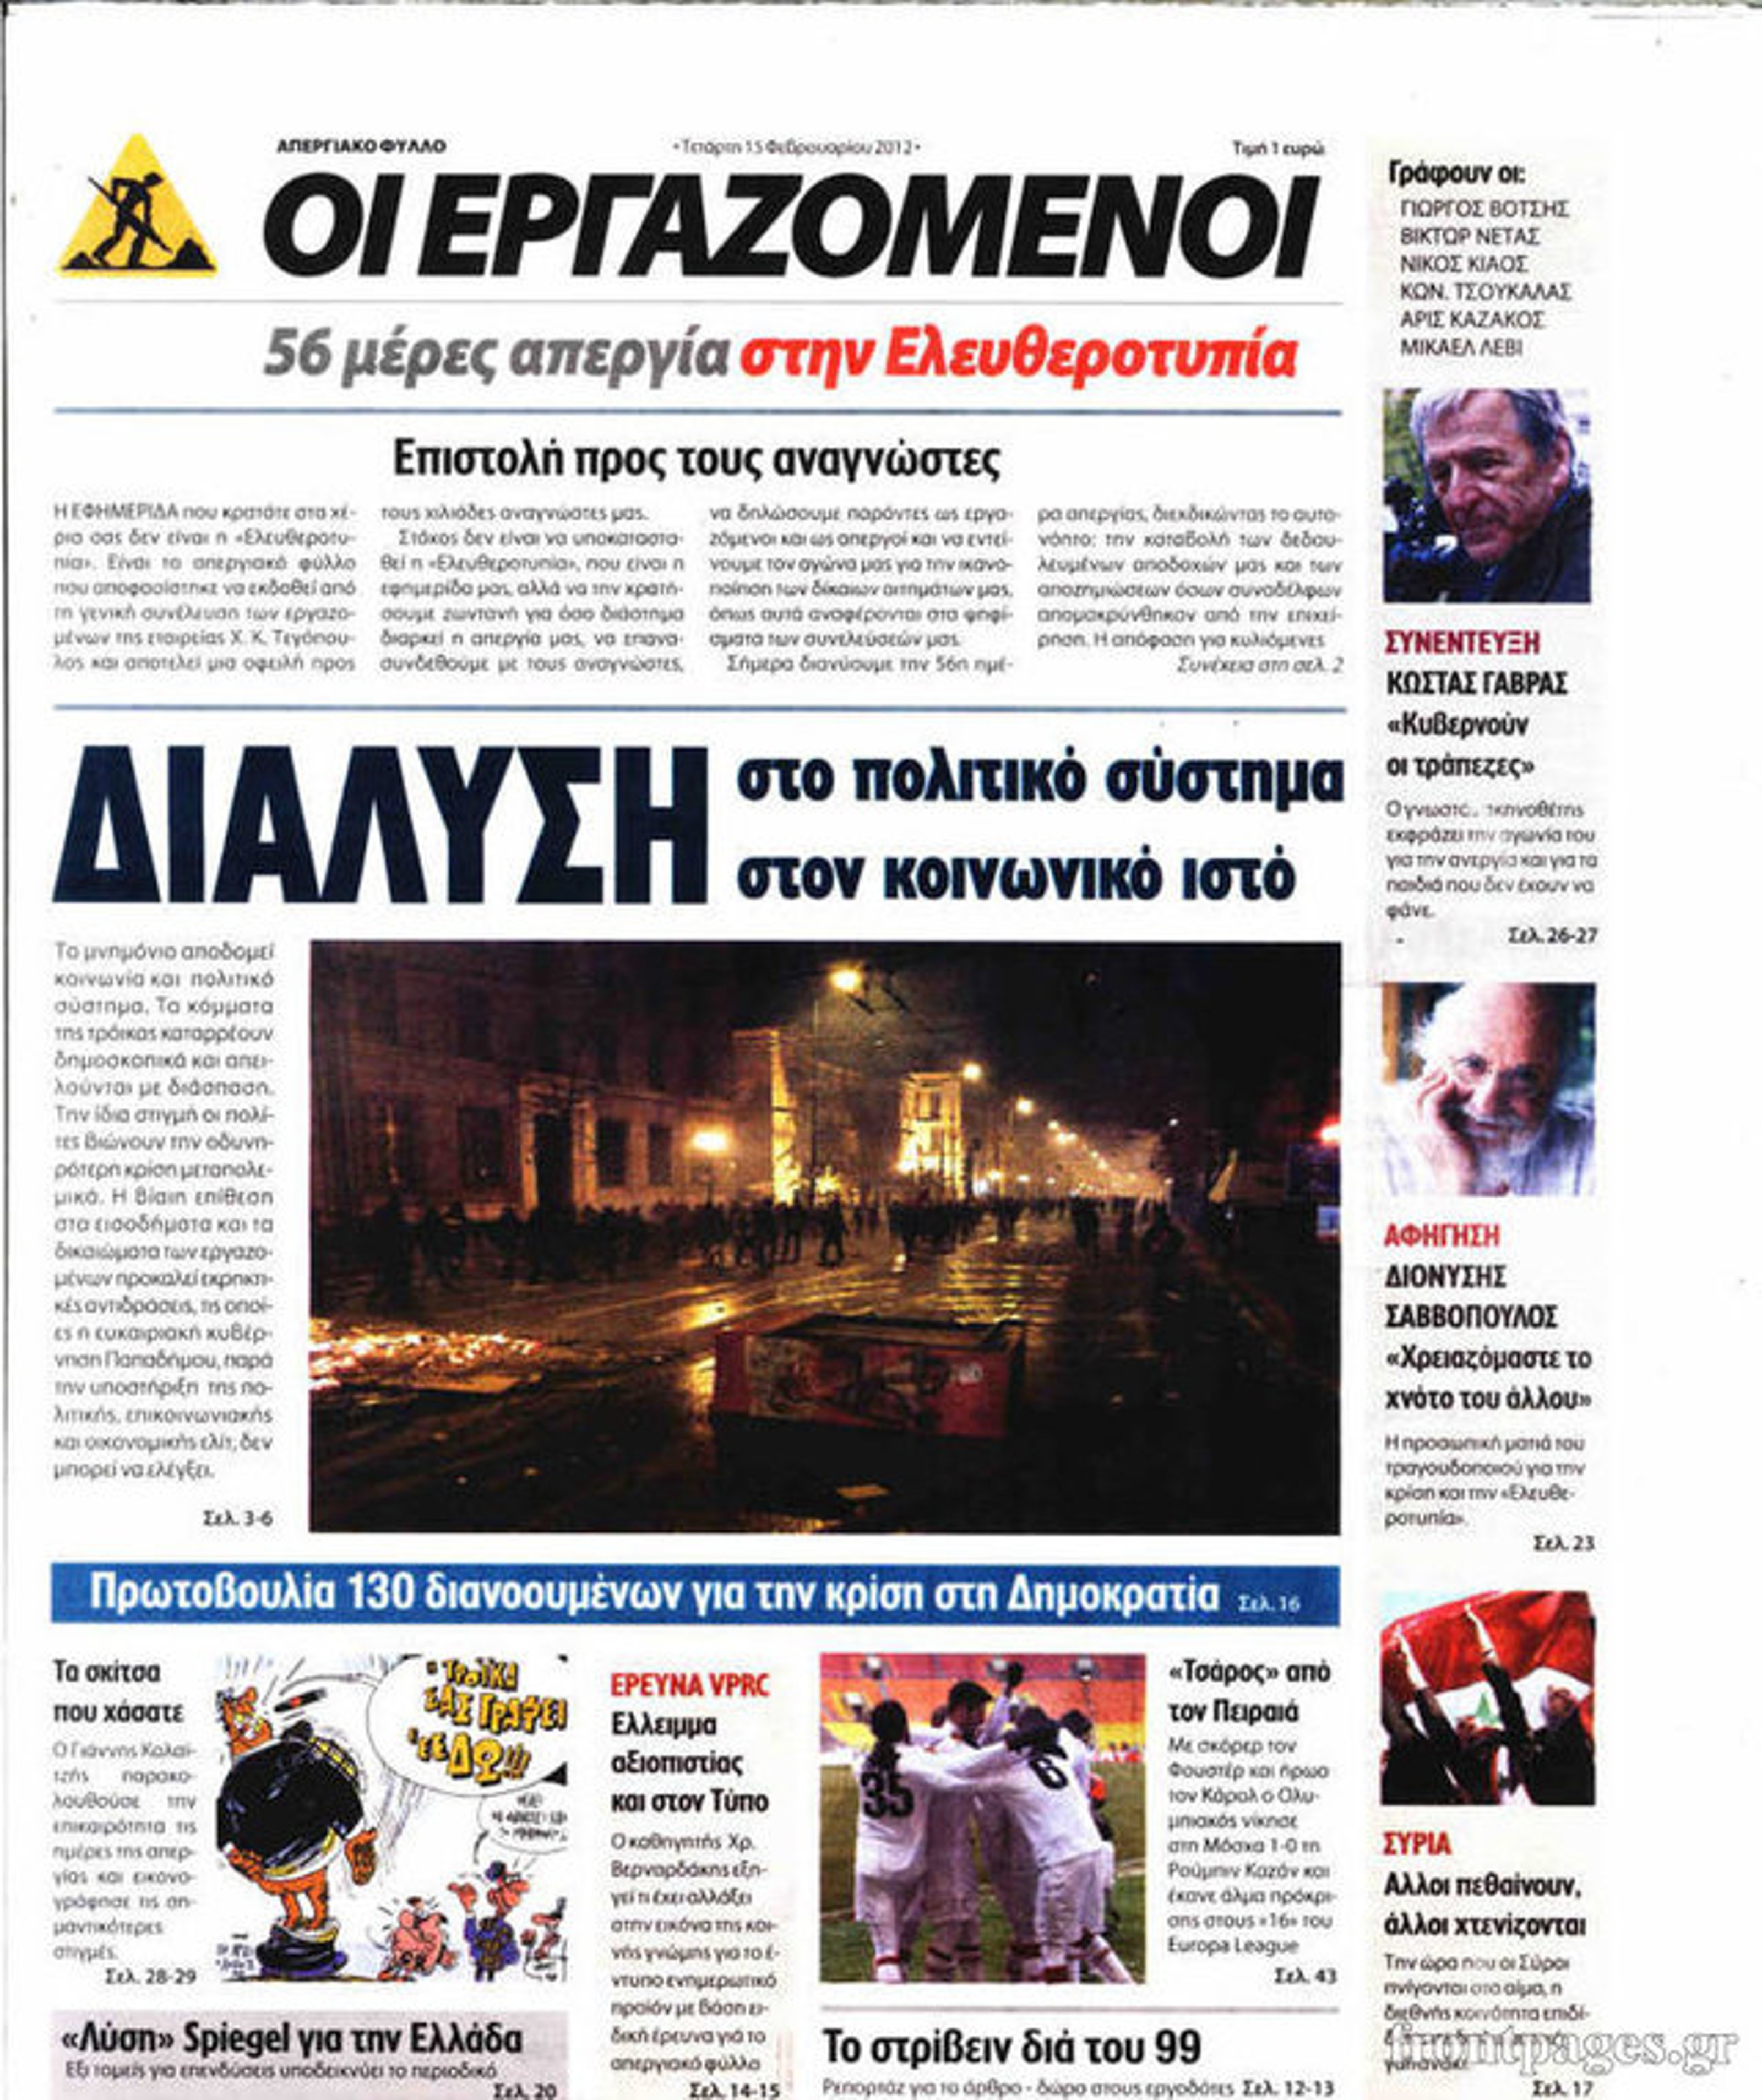 Front page of the newspaper, Workers at Eleftherotypia